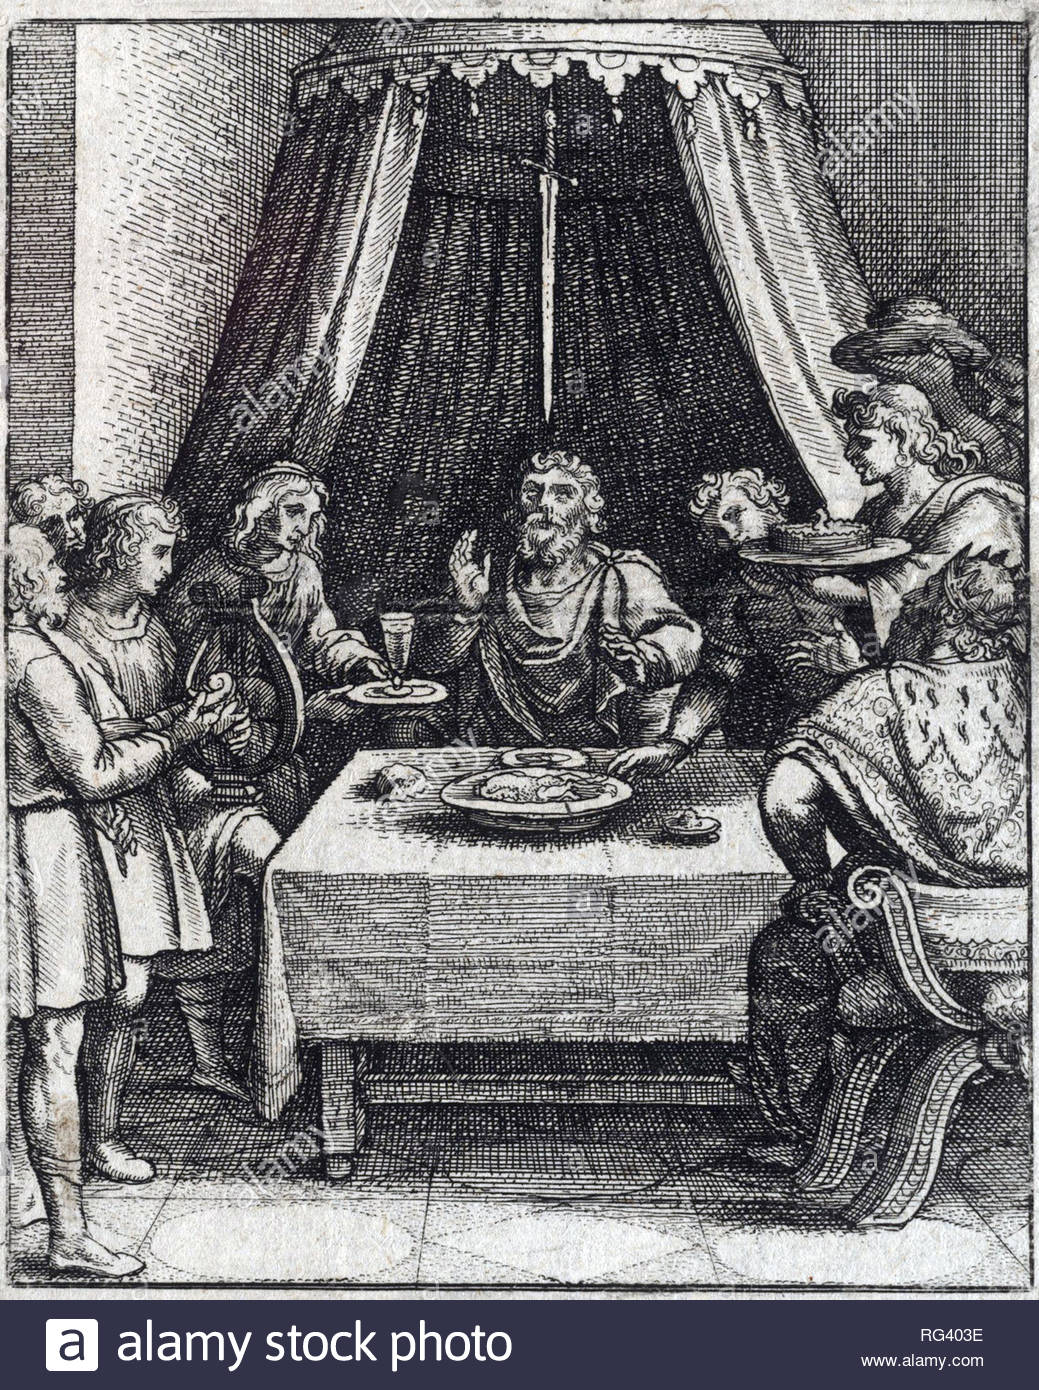 The Sword of Damocles, etching by Bohemian etcher Wenceslaus Hollar from 1600s Stock Photo